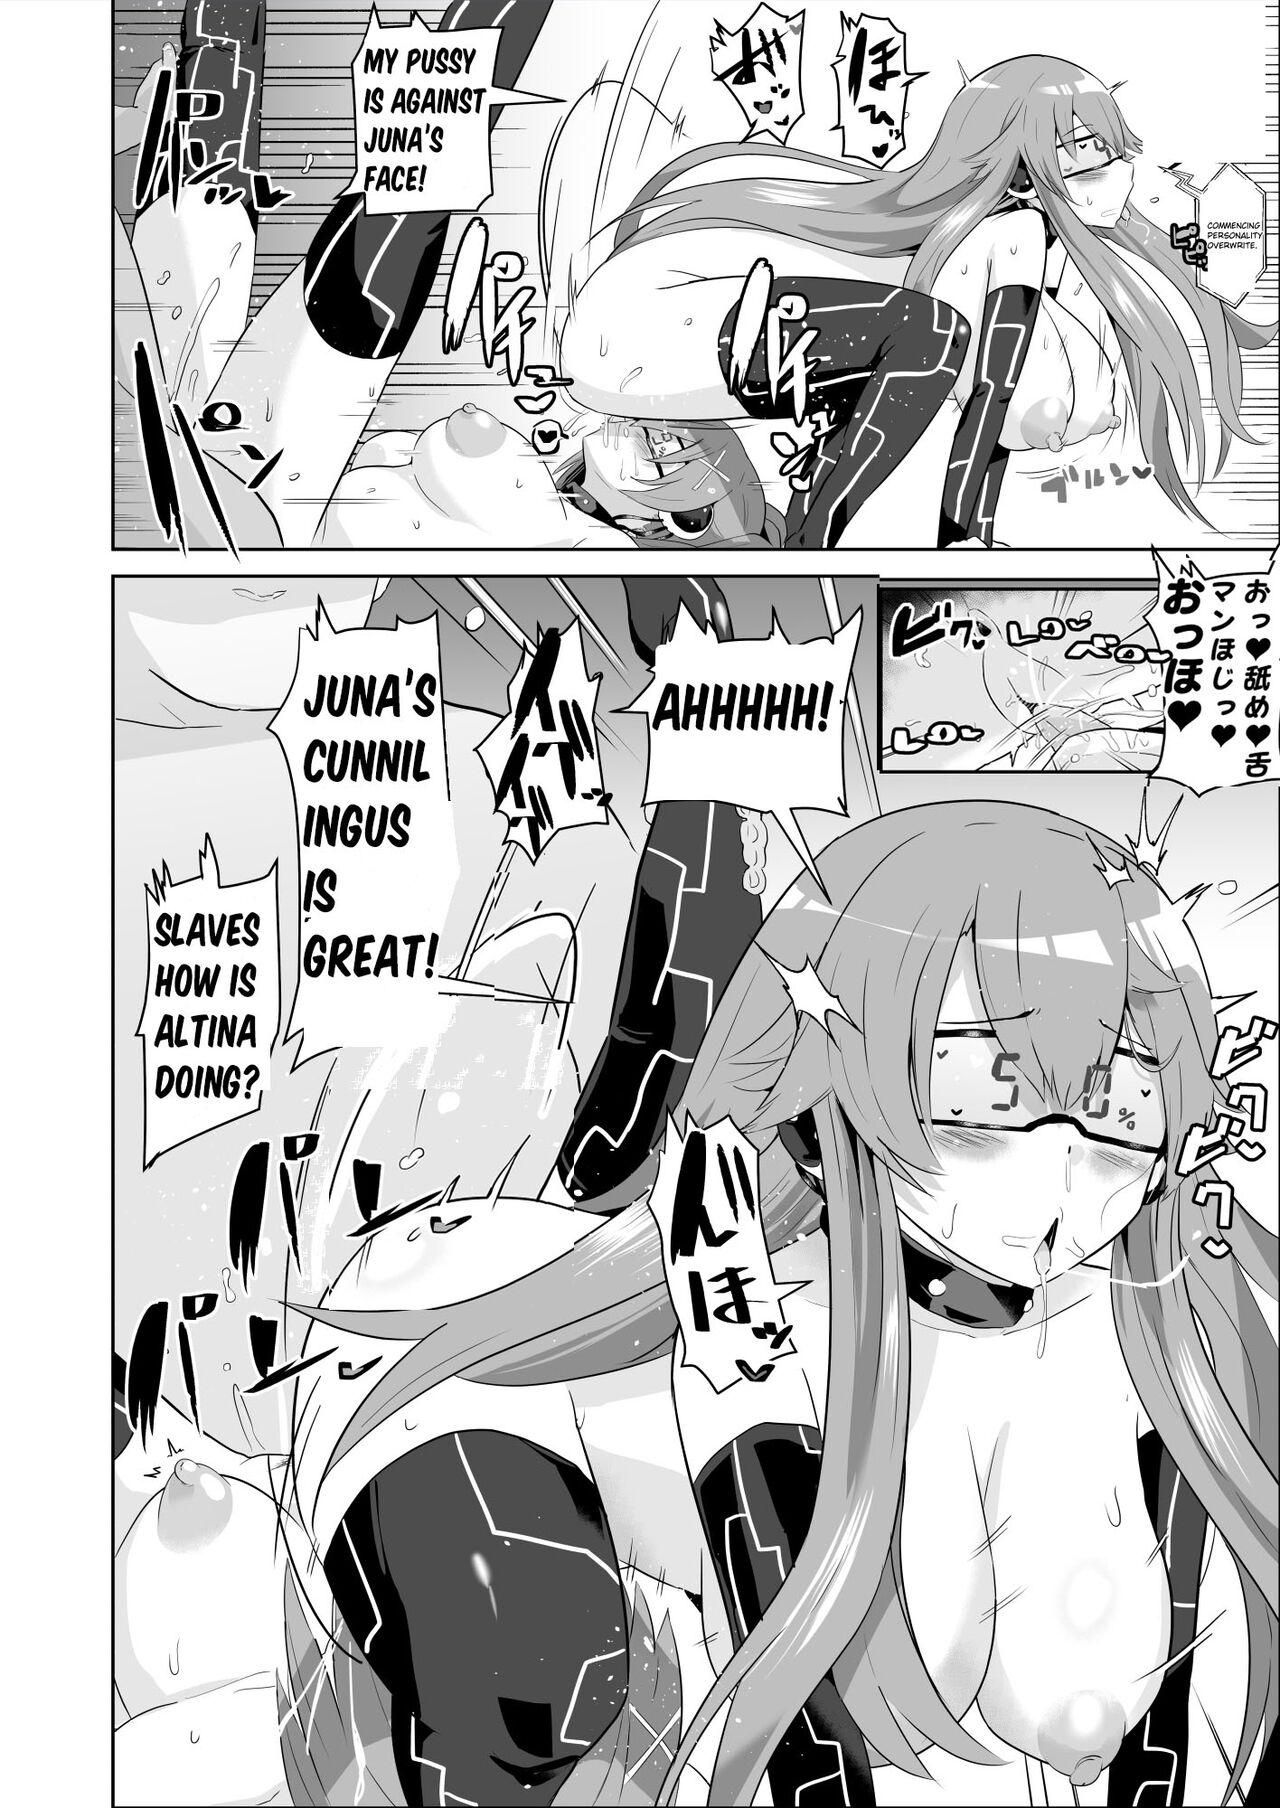 Amante Hypnosis of the New Class VII - Class X's Enslavement - The legend of heroes | eiyuu densetsu Fucking - Page 3